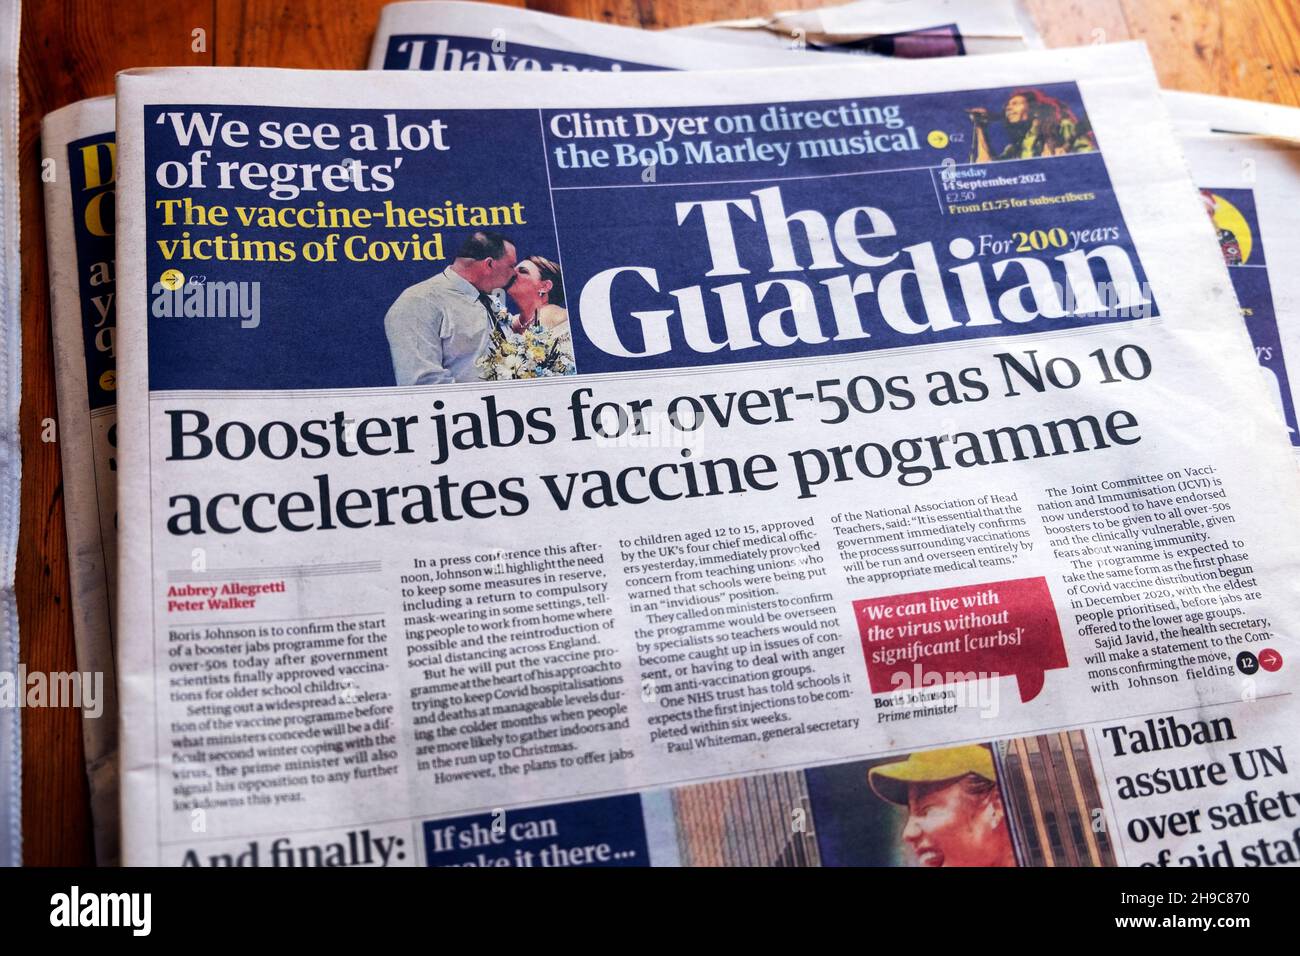 'Booster jabs for over-50s as No 10 accelerates vaccine programme' Guardian covid 19 newspaper headline front page on 14 September 2021 London UK Stock Photo